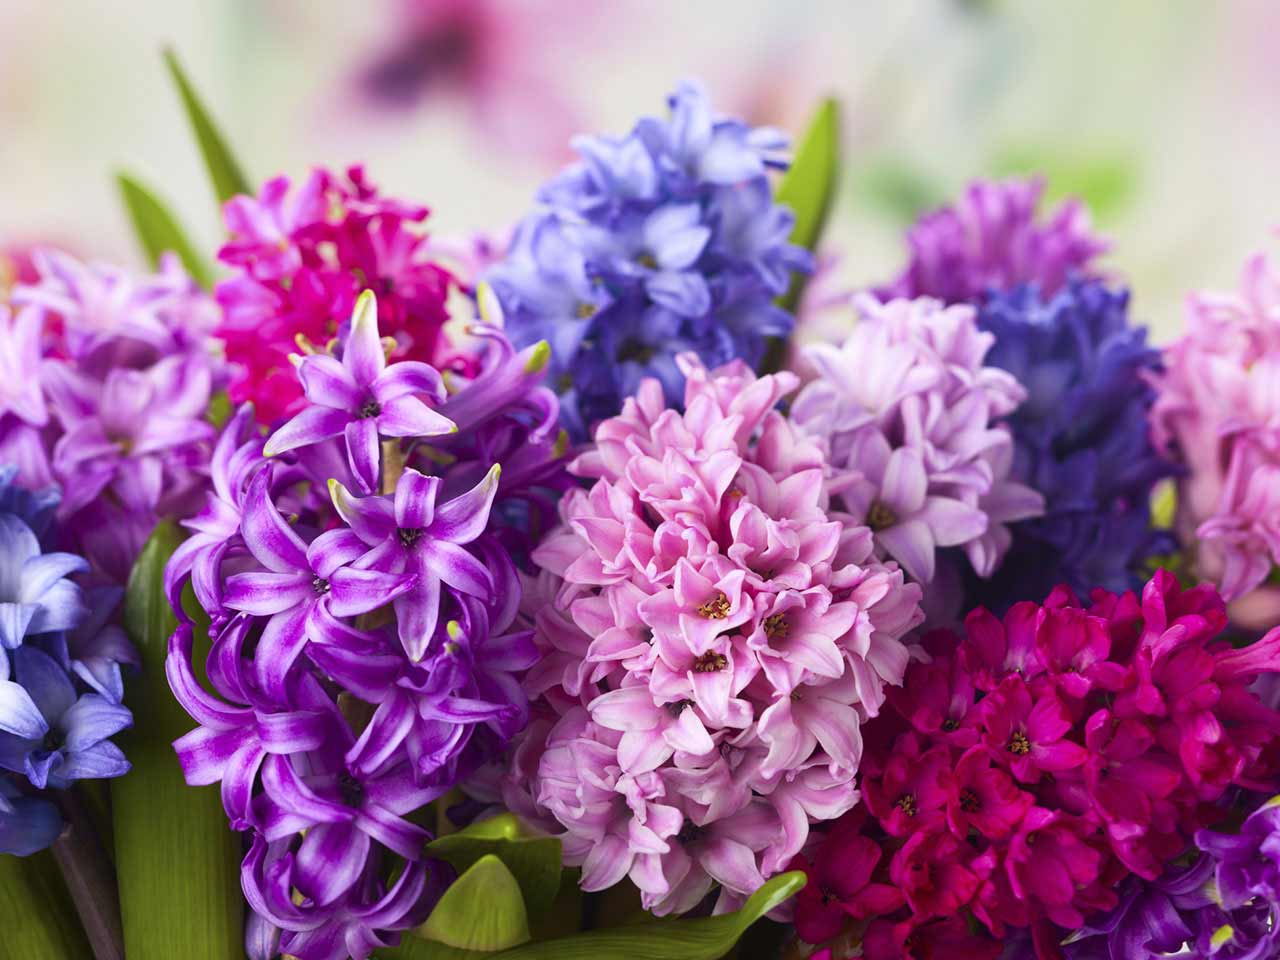 Mulit-coloured hyacinths growing in a container